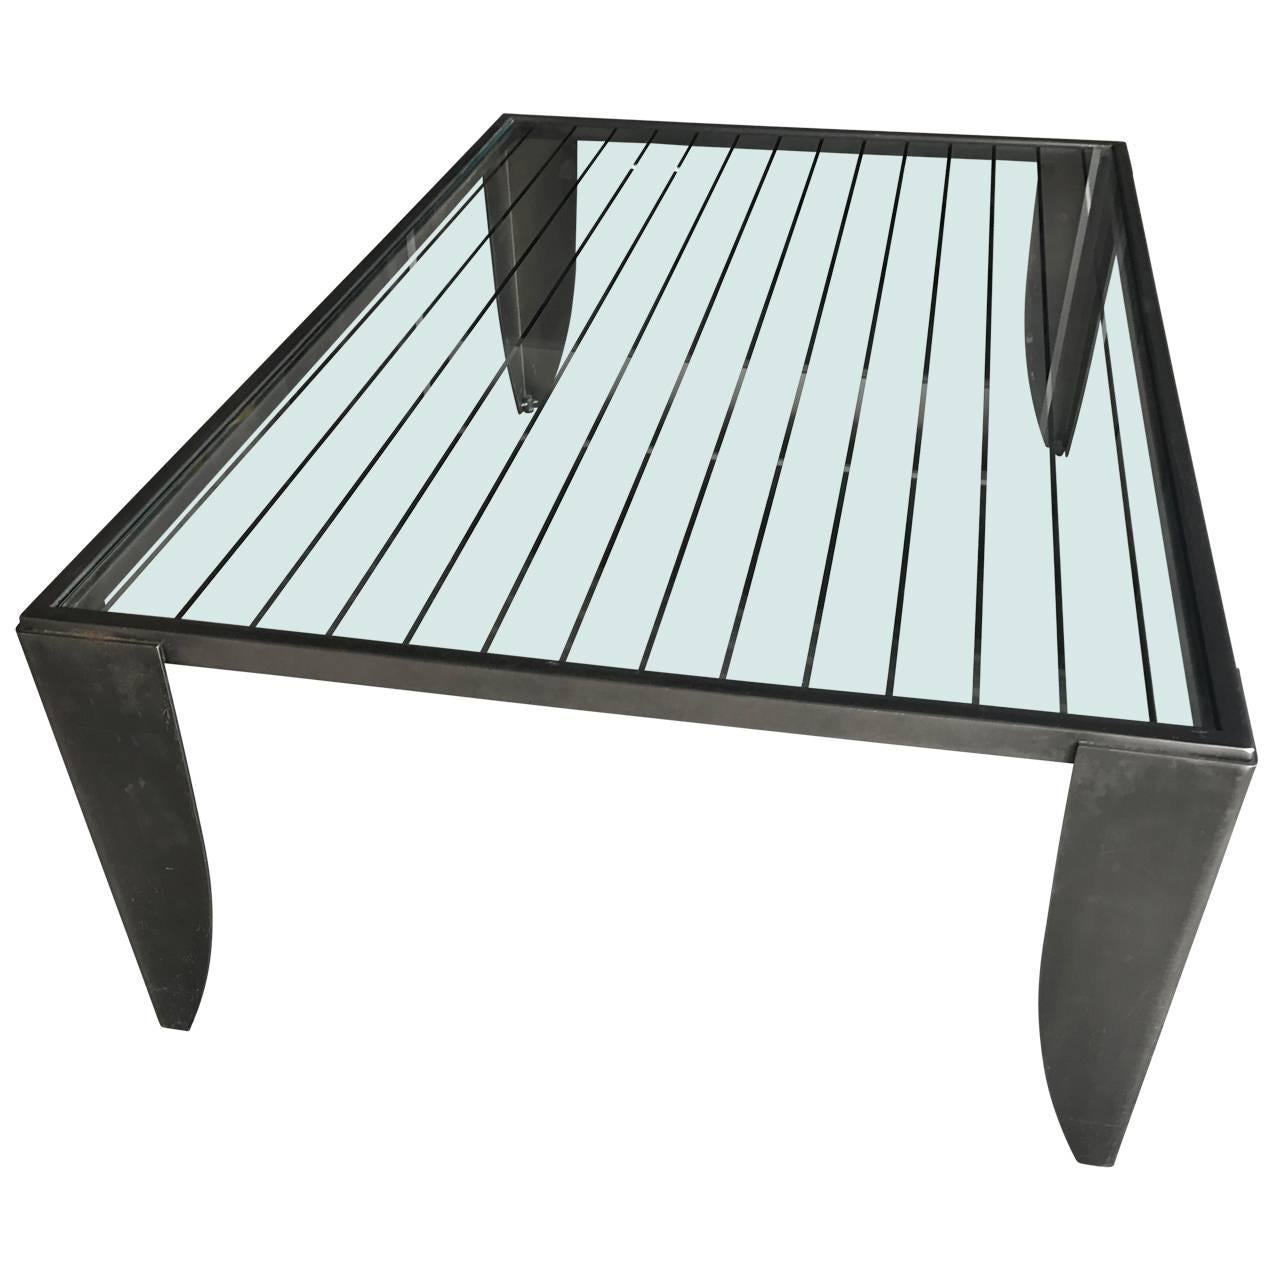 Sleek cocktail table in brushed steel and glass top. Glass top has several etched silvered lines.